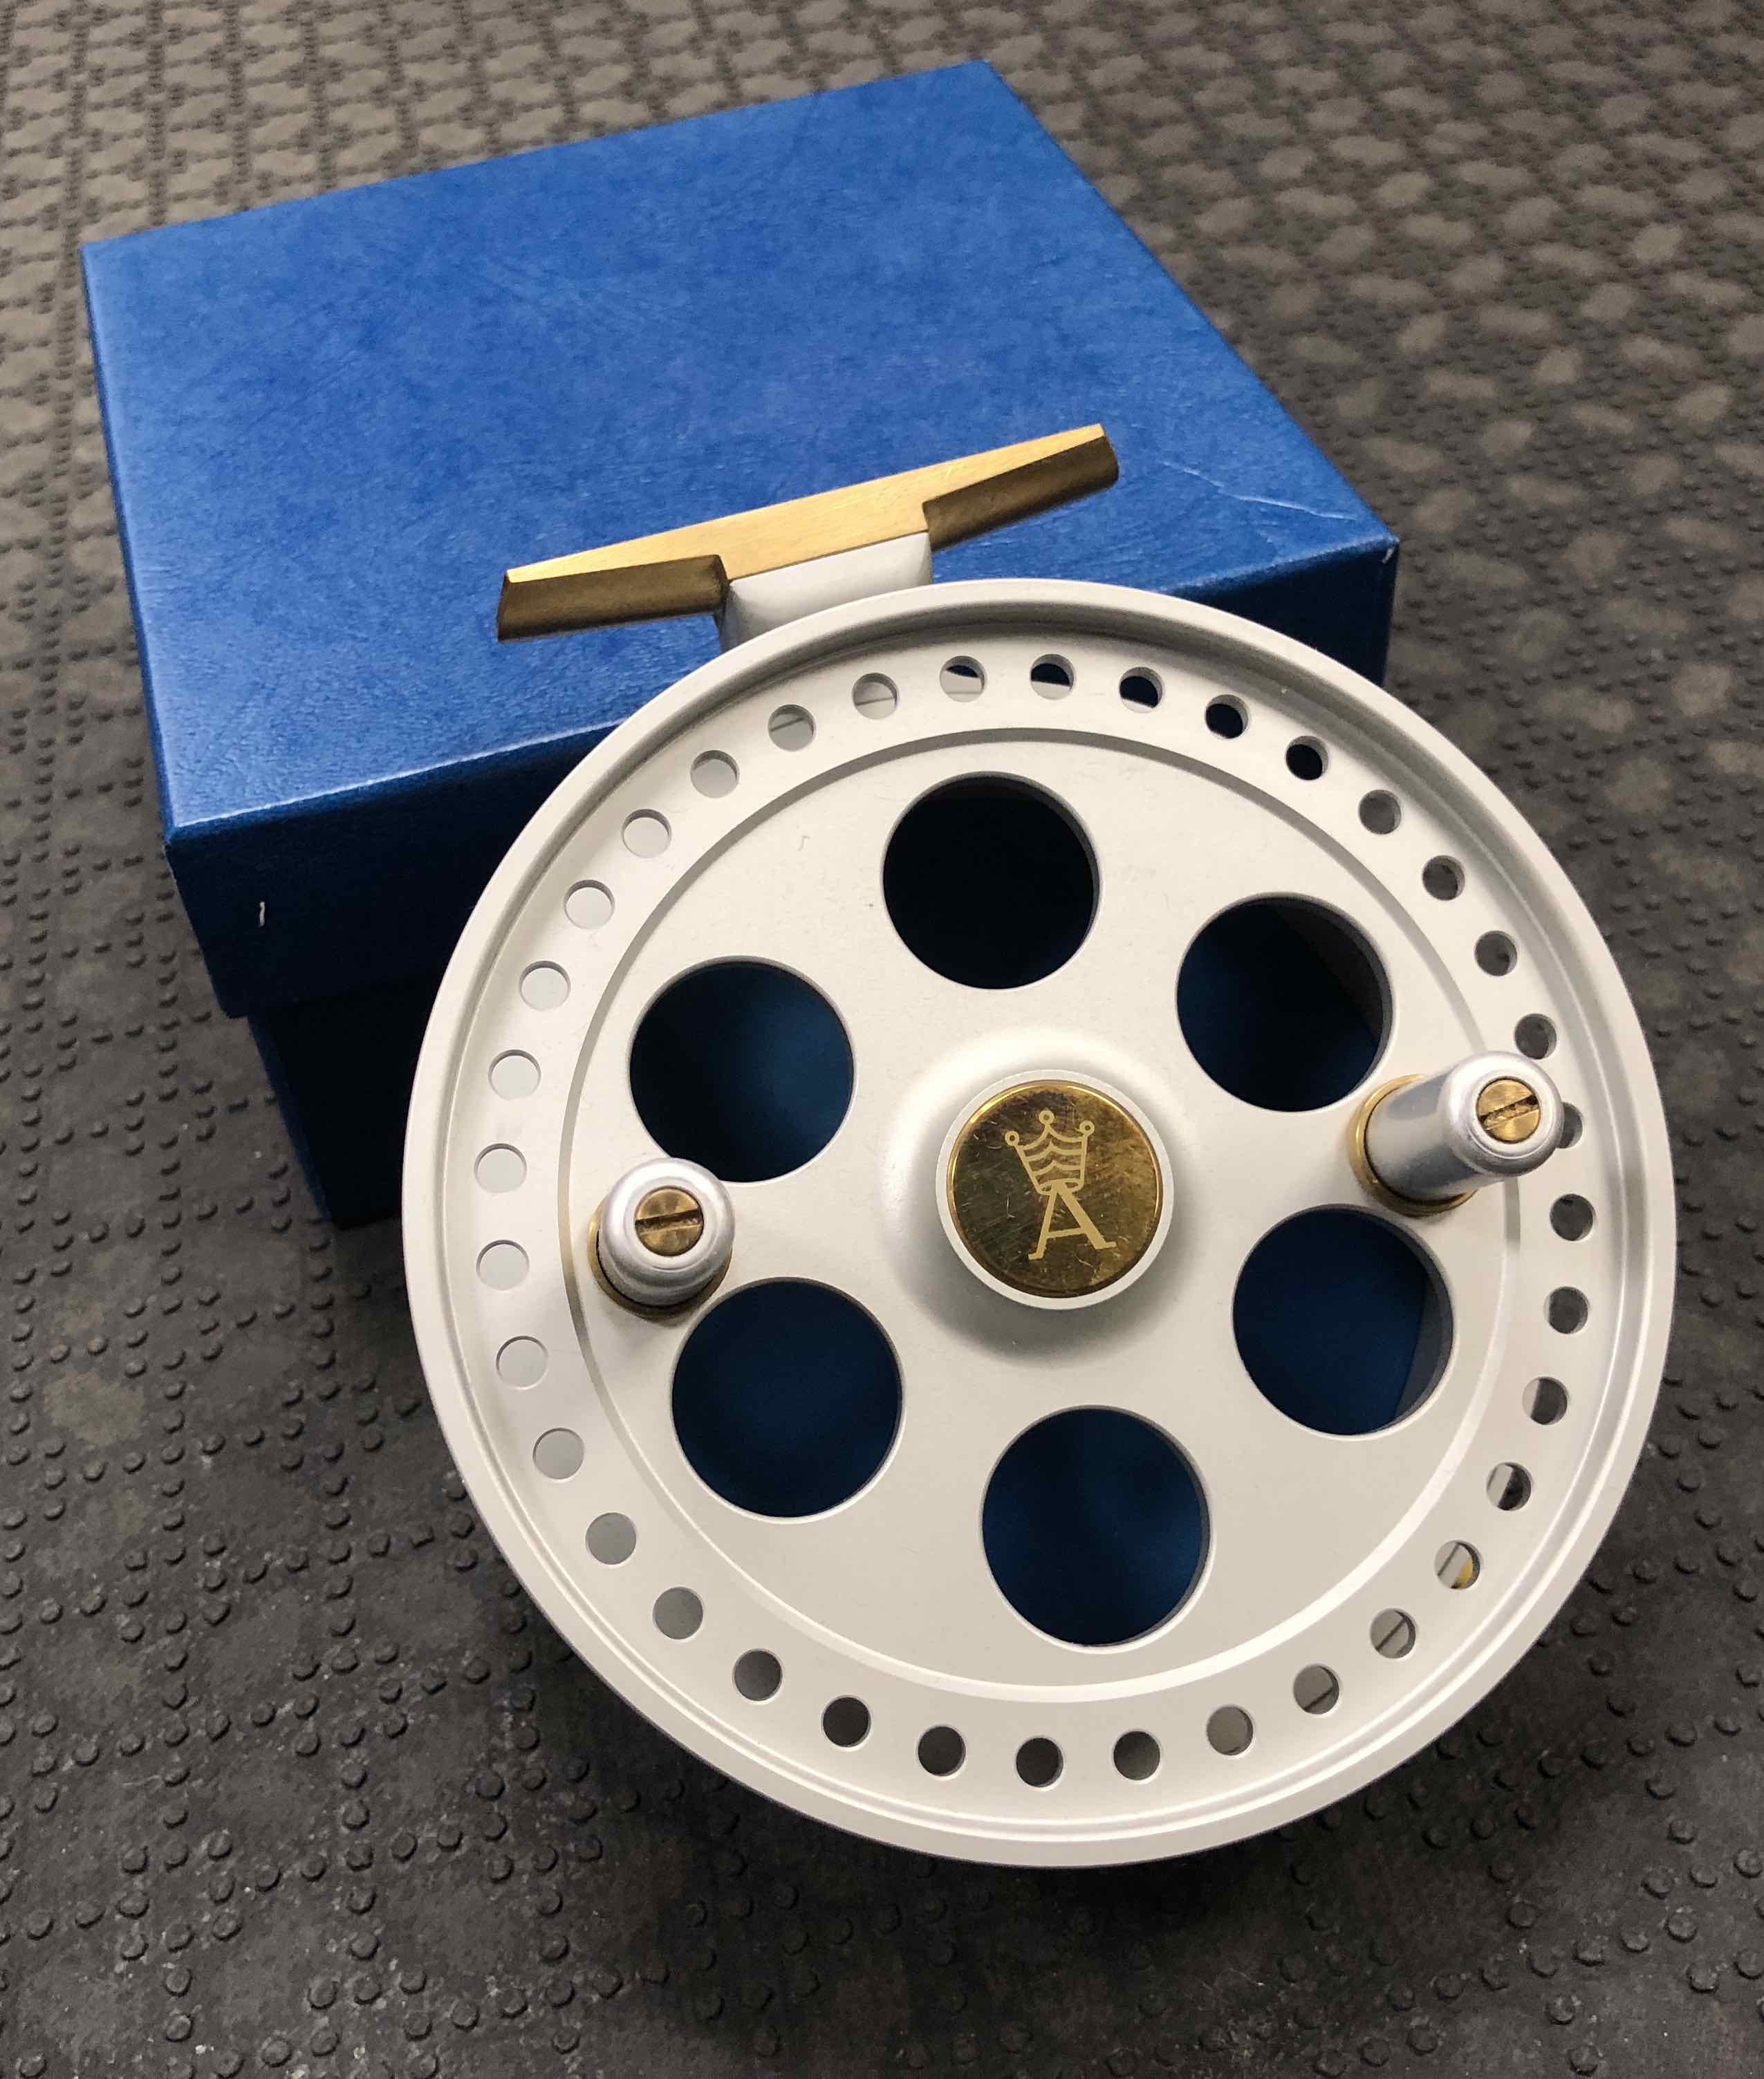 https://thefirstcast.ca/wp-content/uploads/2019/11/Arnold-Kingpin-Series-One-Regal-450-Round-Holed-Spool-Centerpin-Float-Reel-Serial-Number-0737BB.jpg